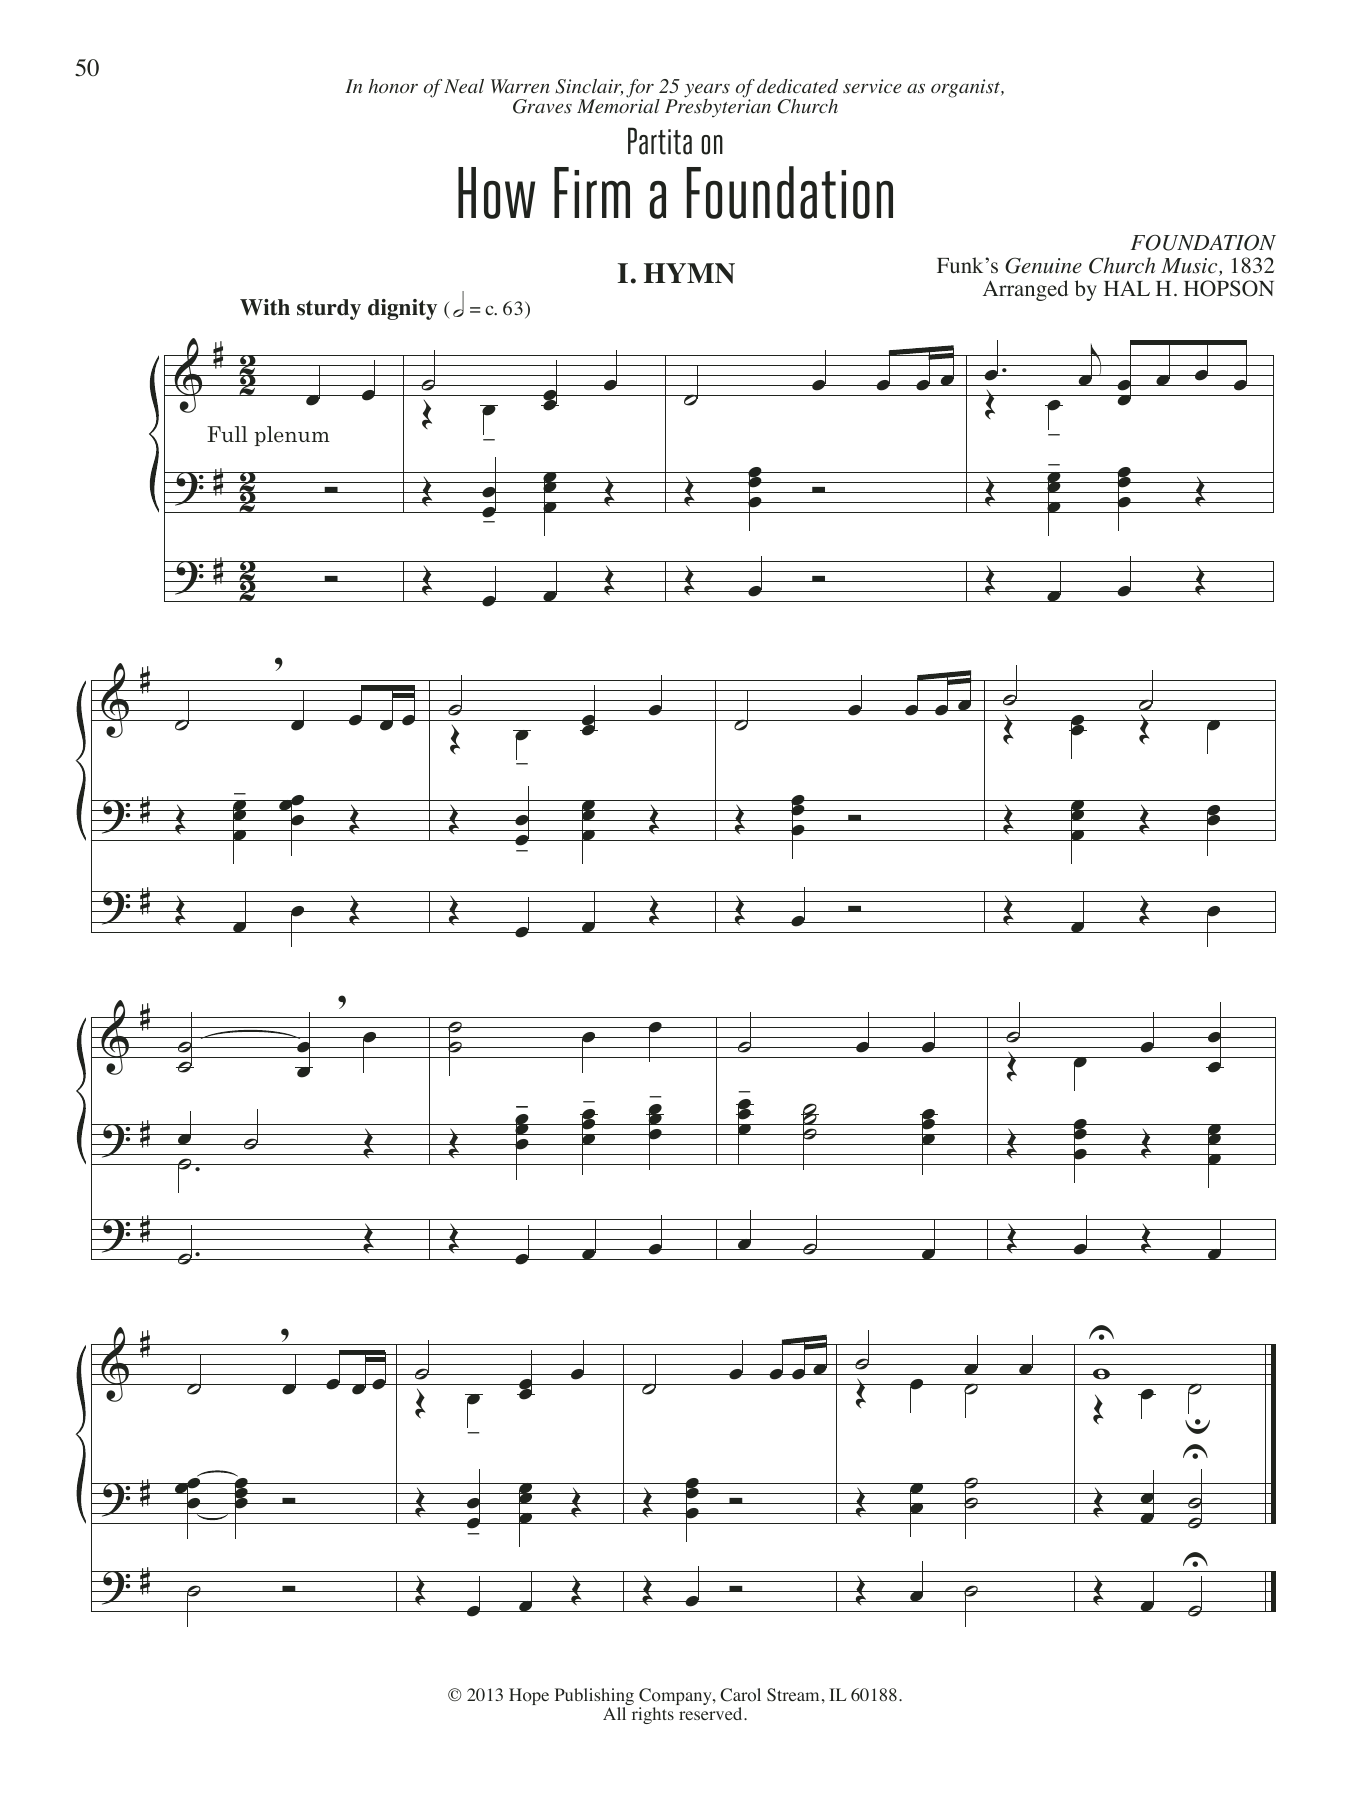 Download Hal H. Hopson How Firm a Foundation Sheet Music